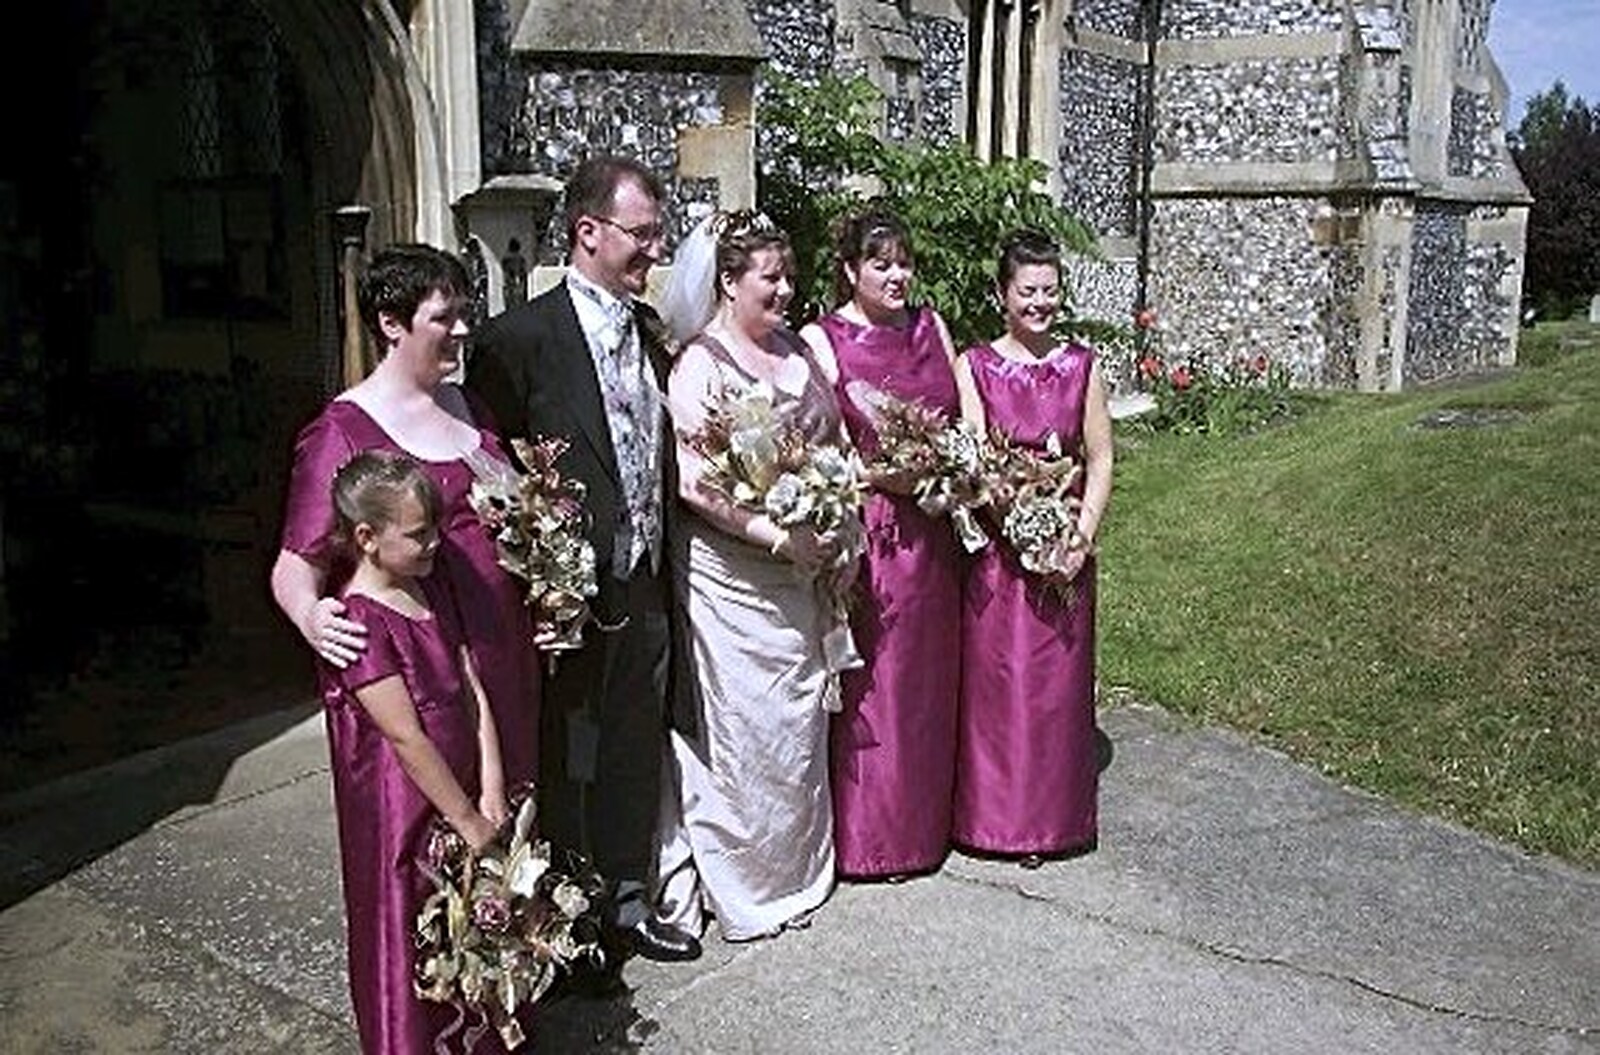 The bridesmaids pose for a photo from Phil and Lisa's Wedding, Woolverston Hall, Ipswich, Suffolk - 1st July 2001